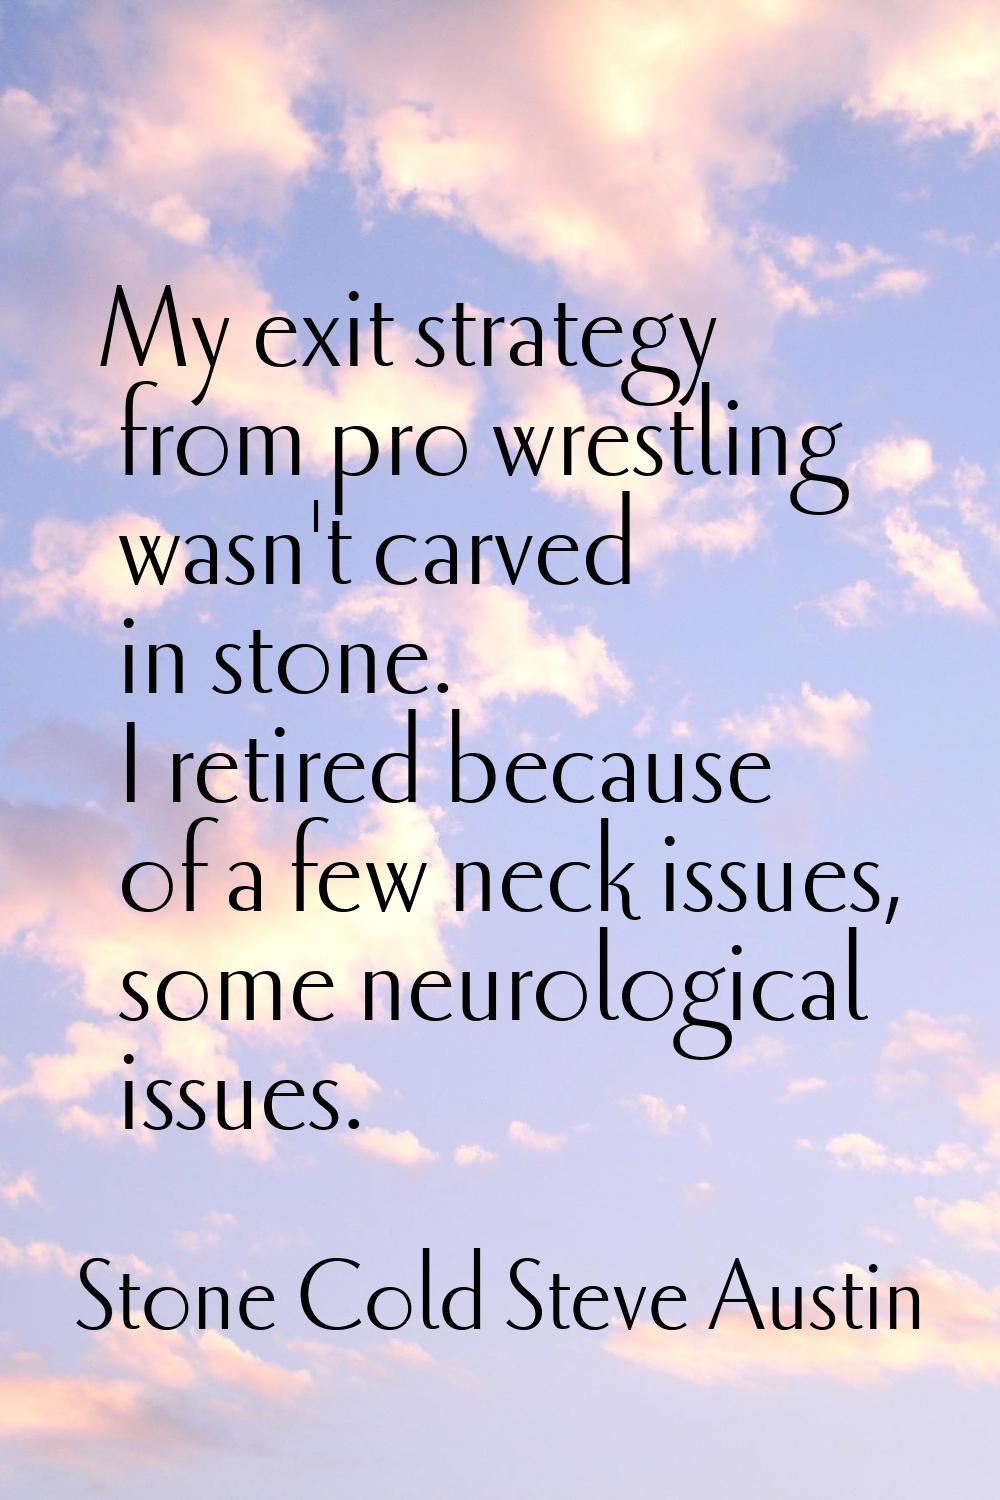 My exit strategy from pro wrestling wasn't carved in stone. I retired because of a few neck issues,